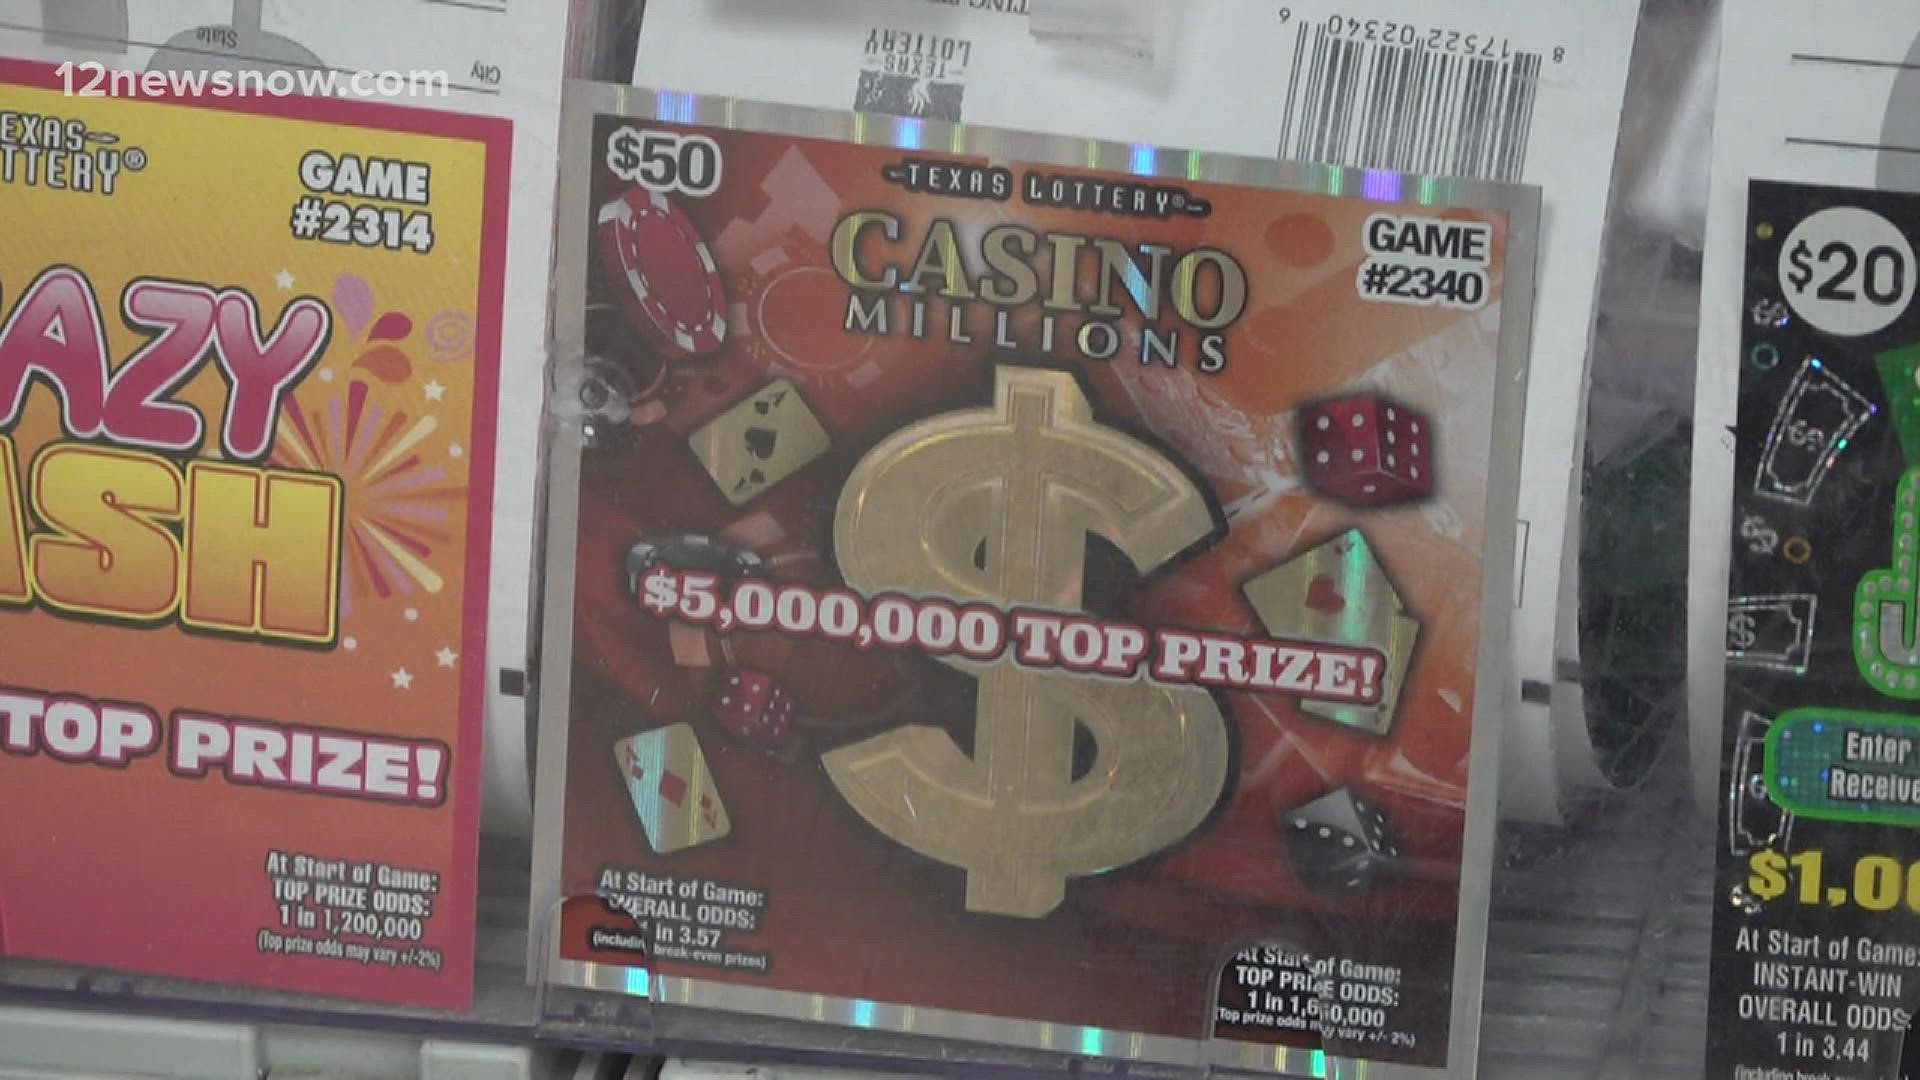 A Batson resident recently purchased a "Casino Millions" Texas Lottery scratch-off ticket worth $5 million according to a release from the Texas Lottery Commission.